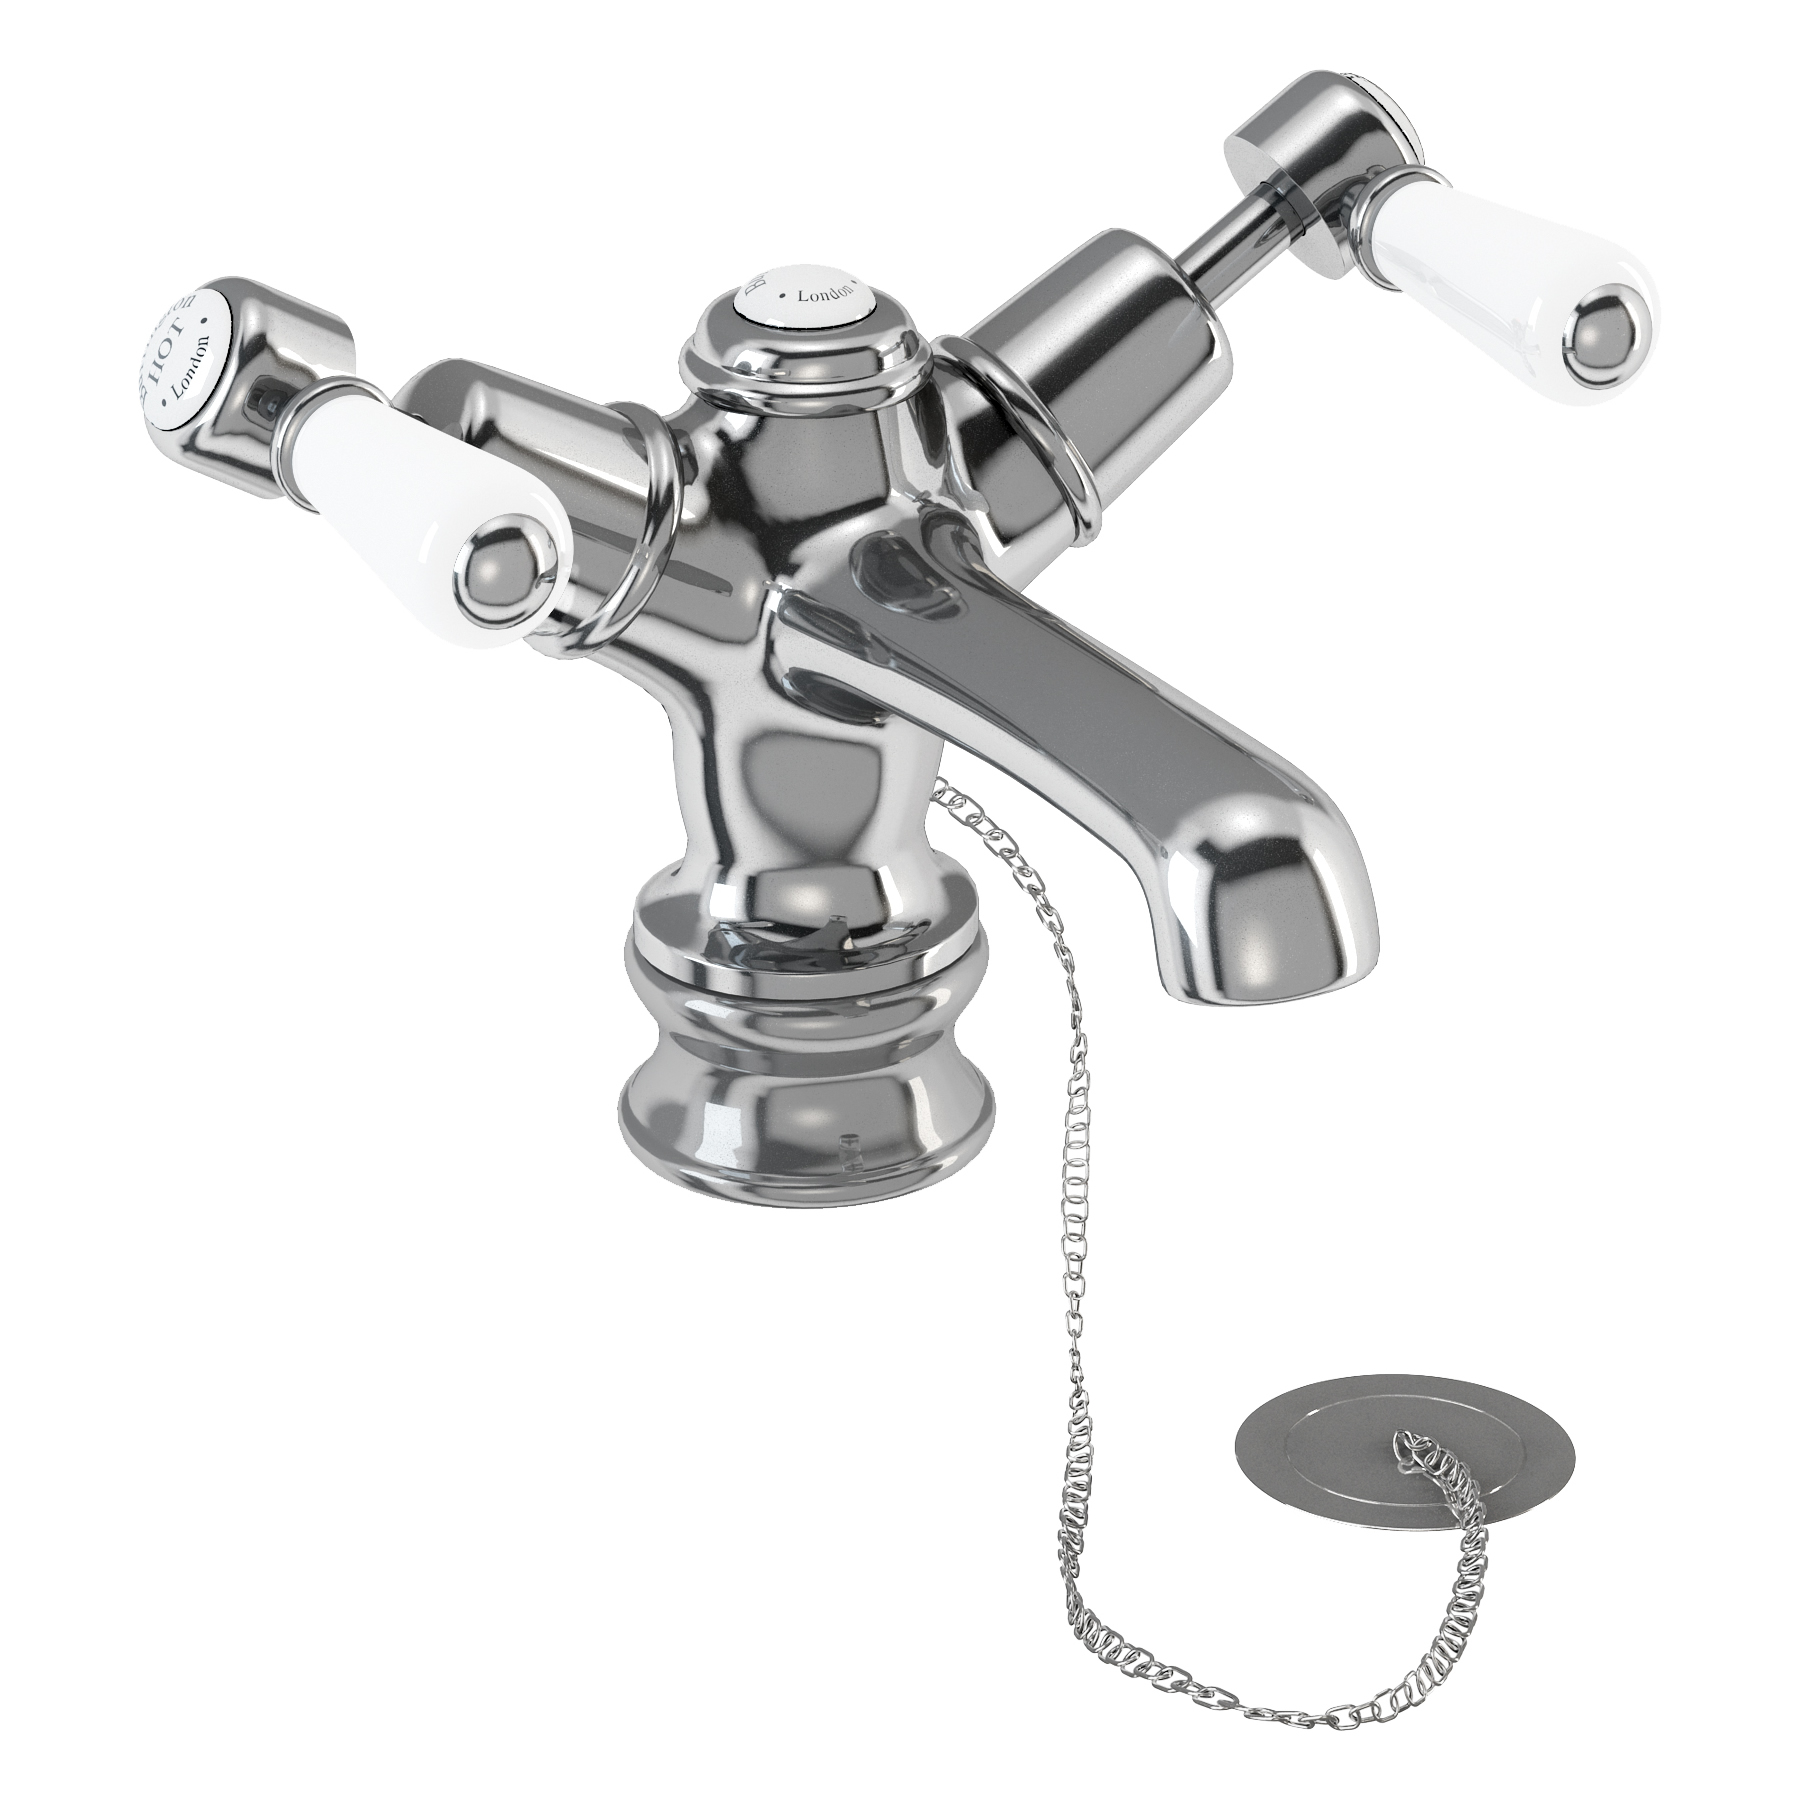 Kensington Regent basin mixer with low central indice with plug and chain waste